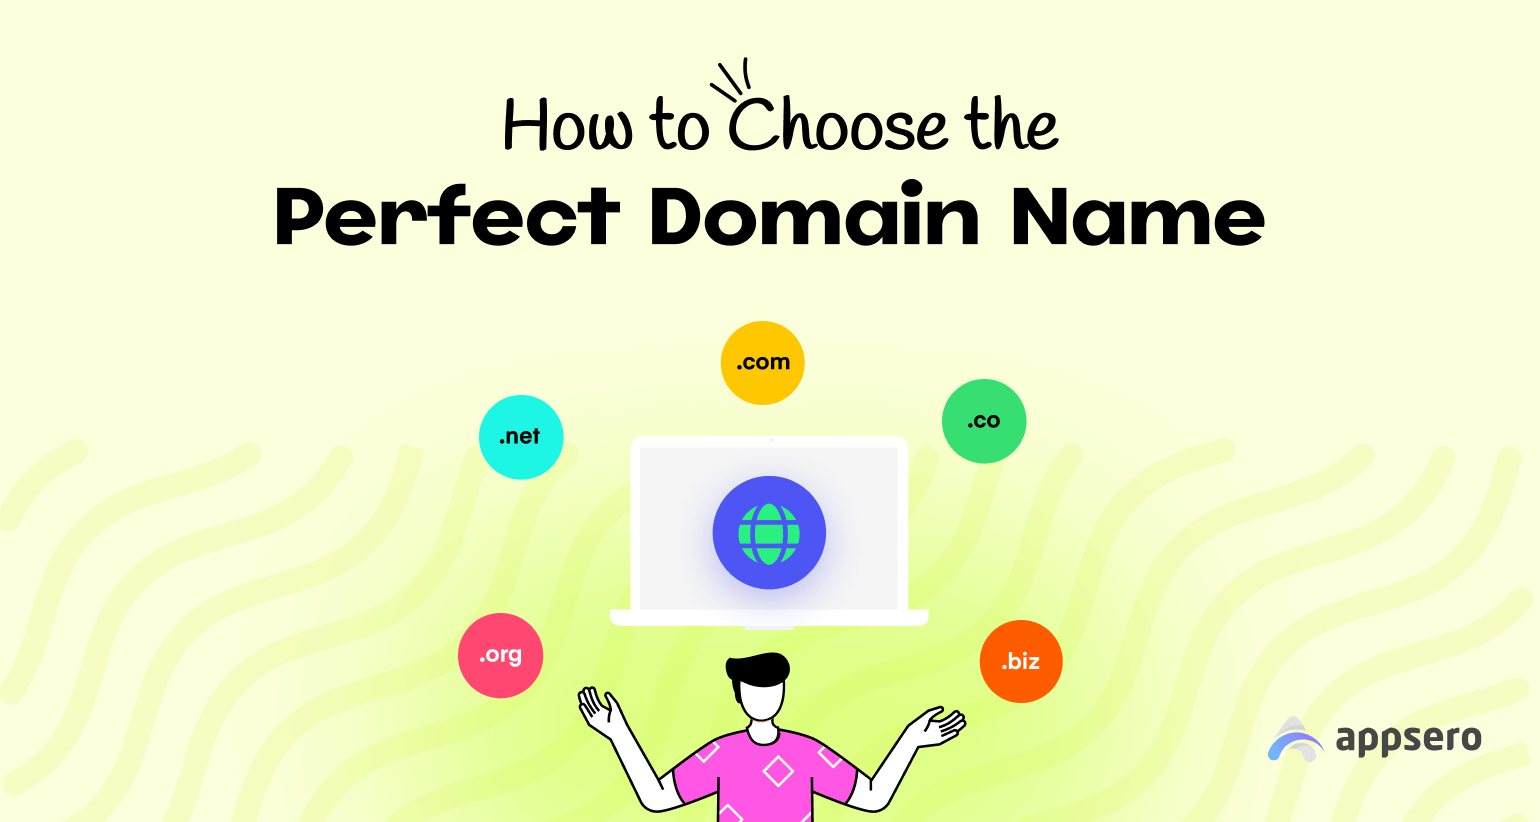 How to Choose the Perfect Domain Name for Your Business – 15+ Proven Tips